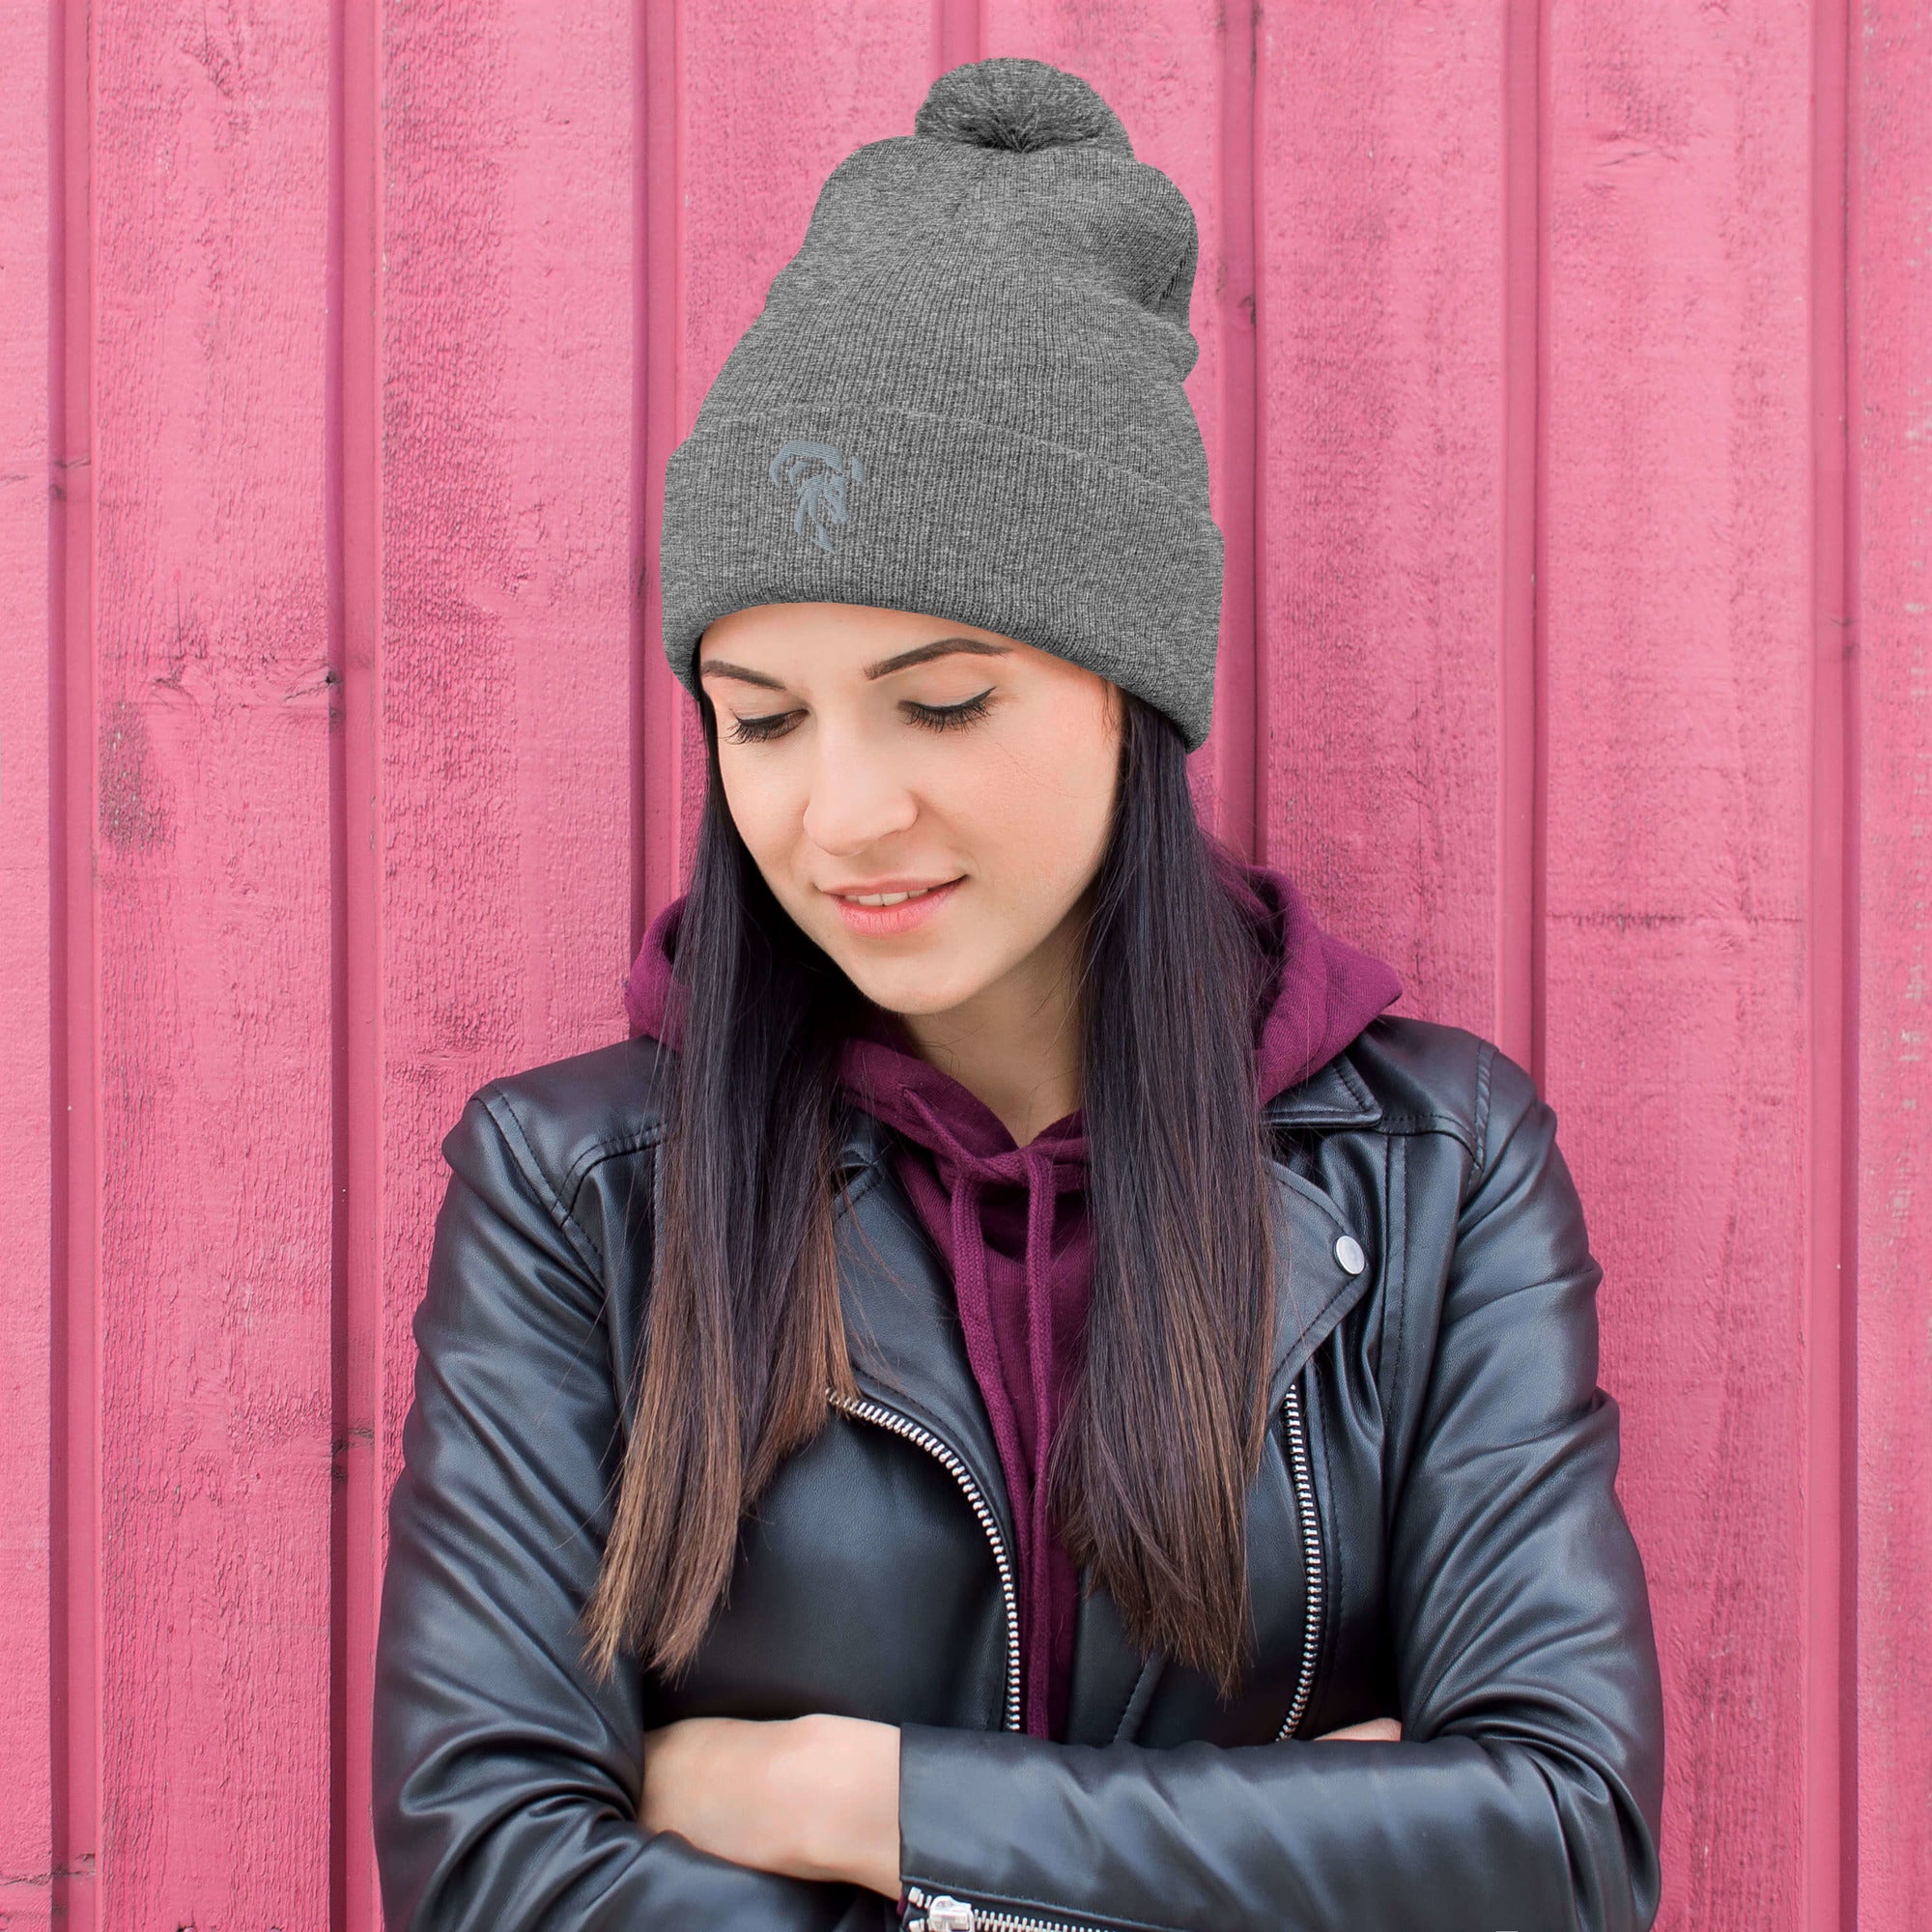 Unisex Pom-Pom Beanie: Filly Style for Fashion and Warmth